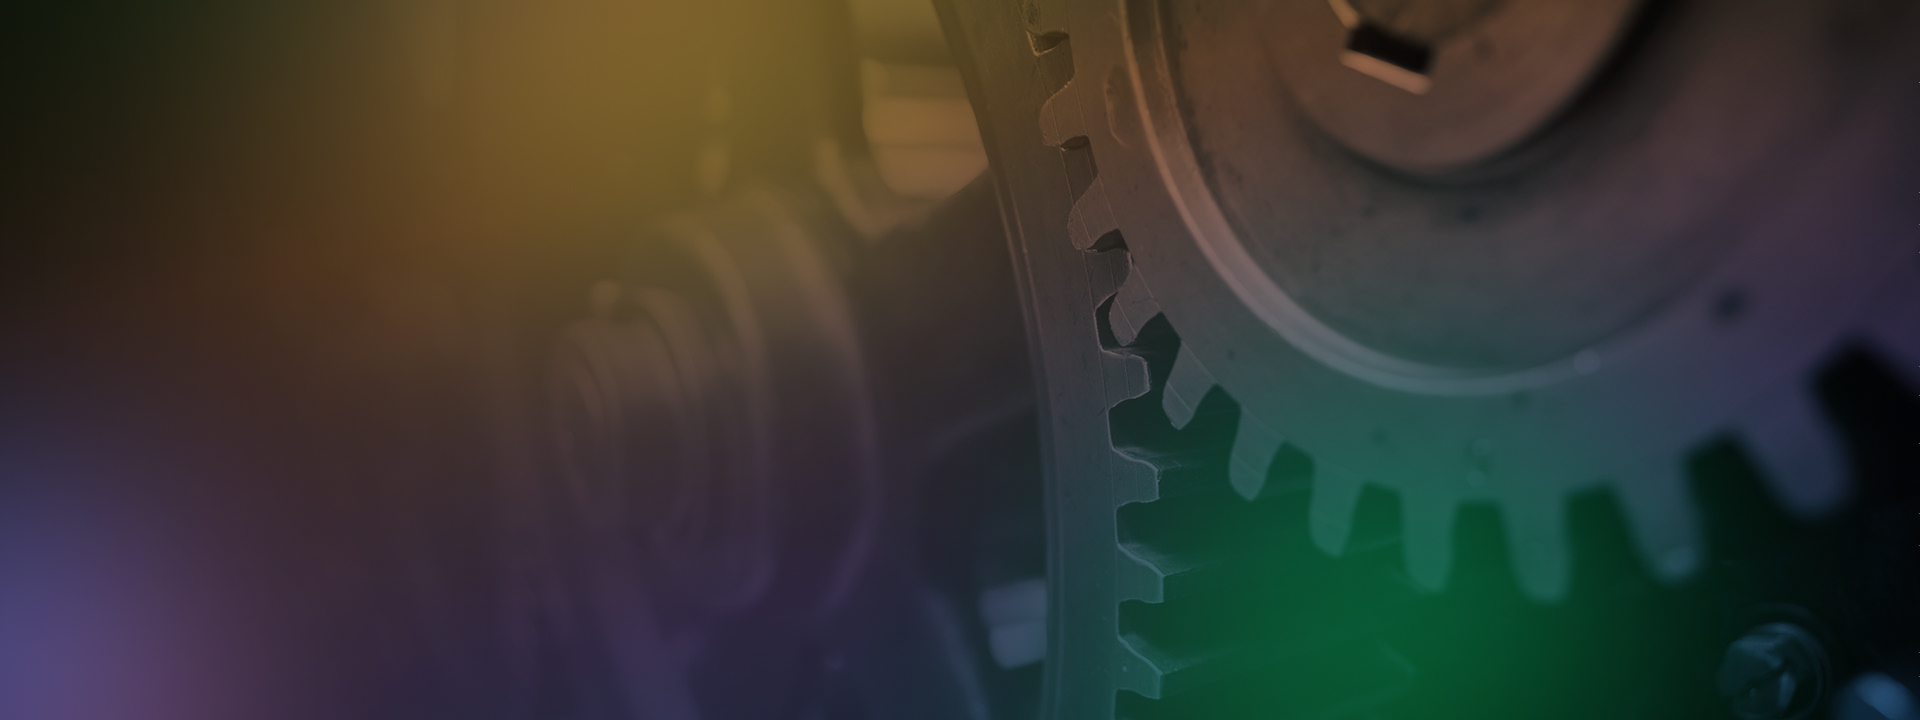 close-up image of interlocking gears turning with a rainbow gradient overlay